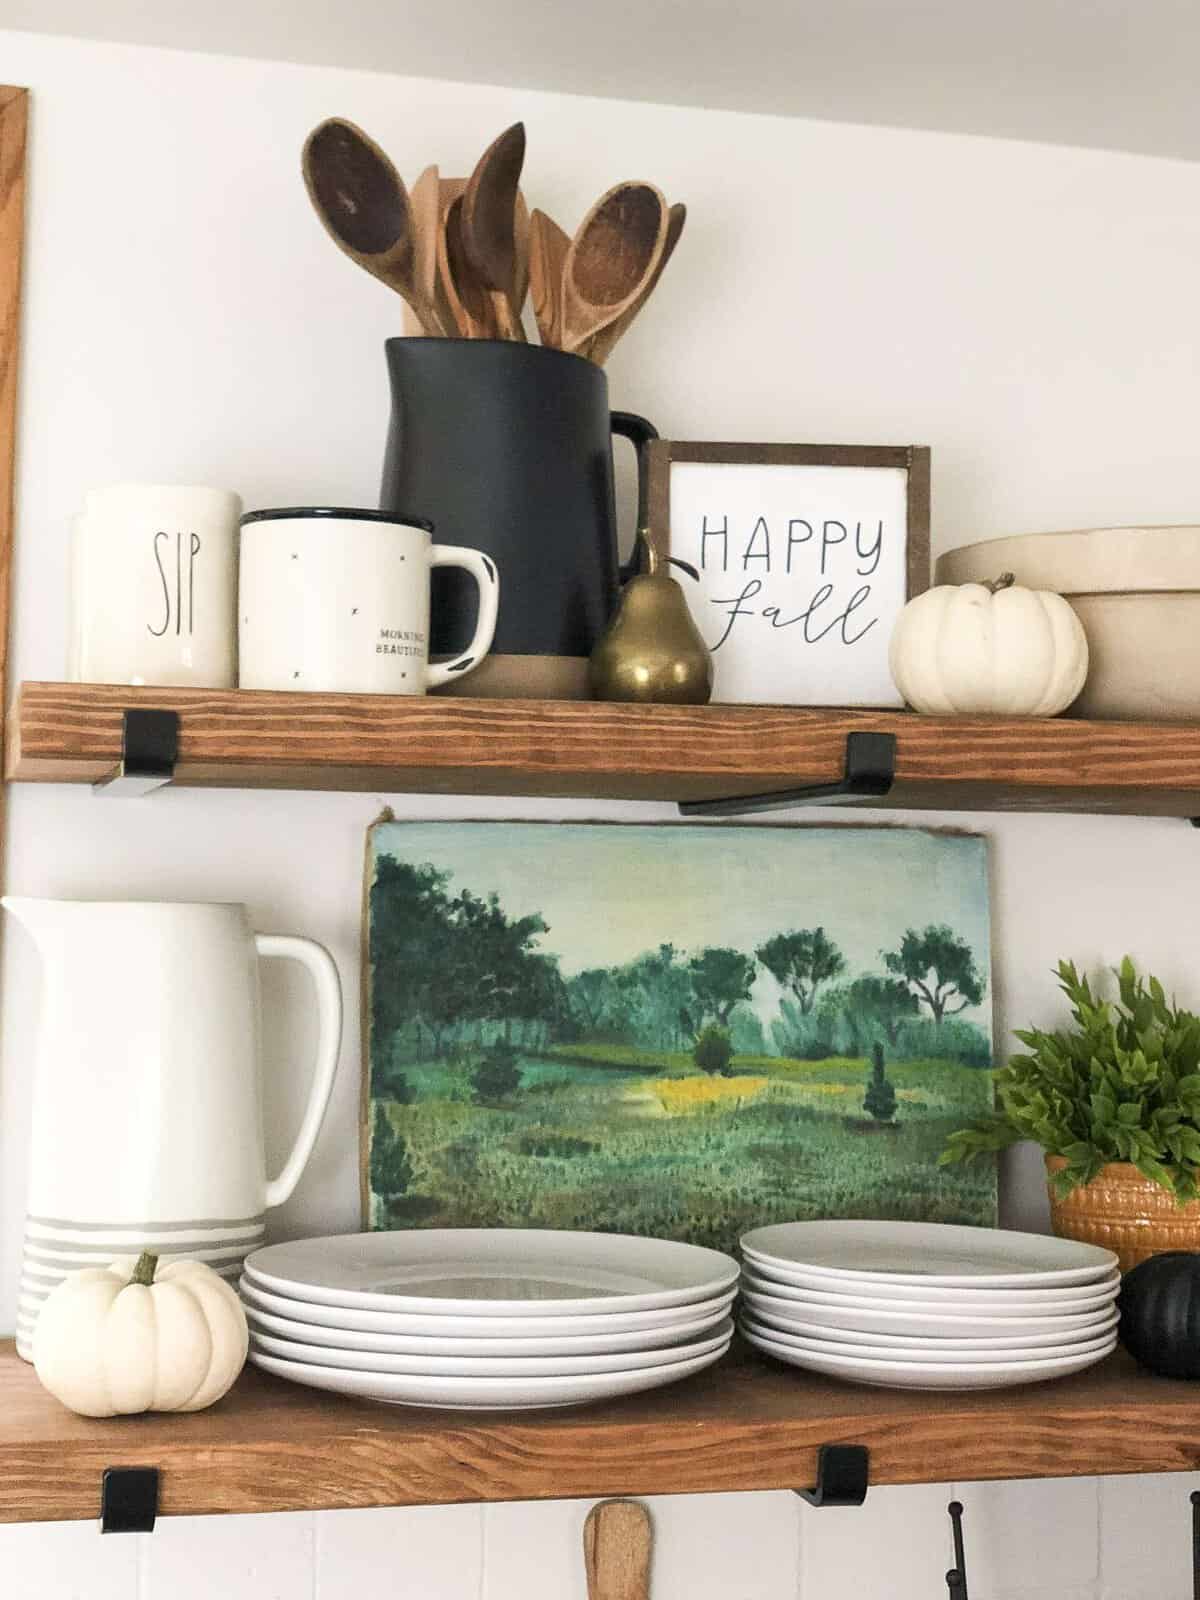 Dining in the Fall | Read more to see simple and affordable fall decor ideas for the kitchen and dining room! #falldecorideas #kitchendecor